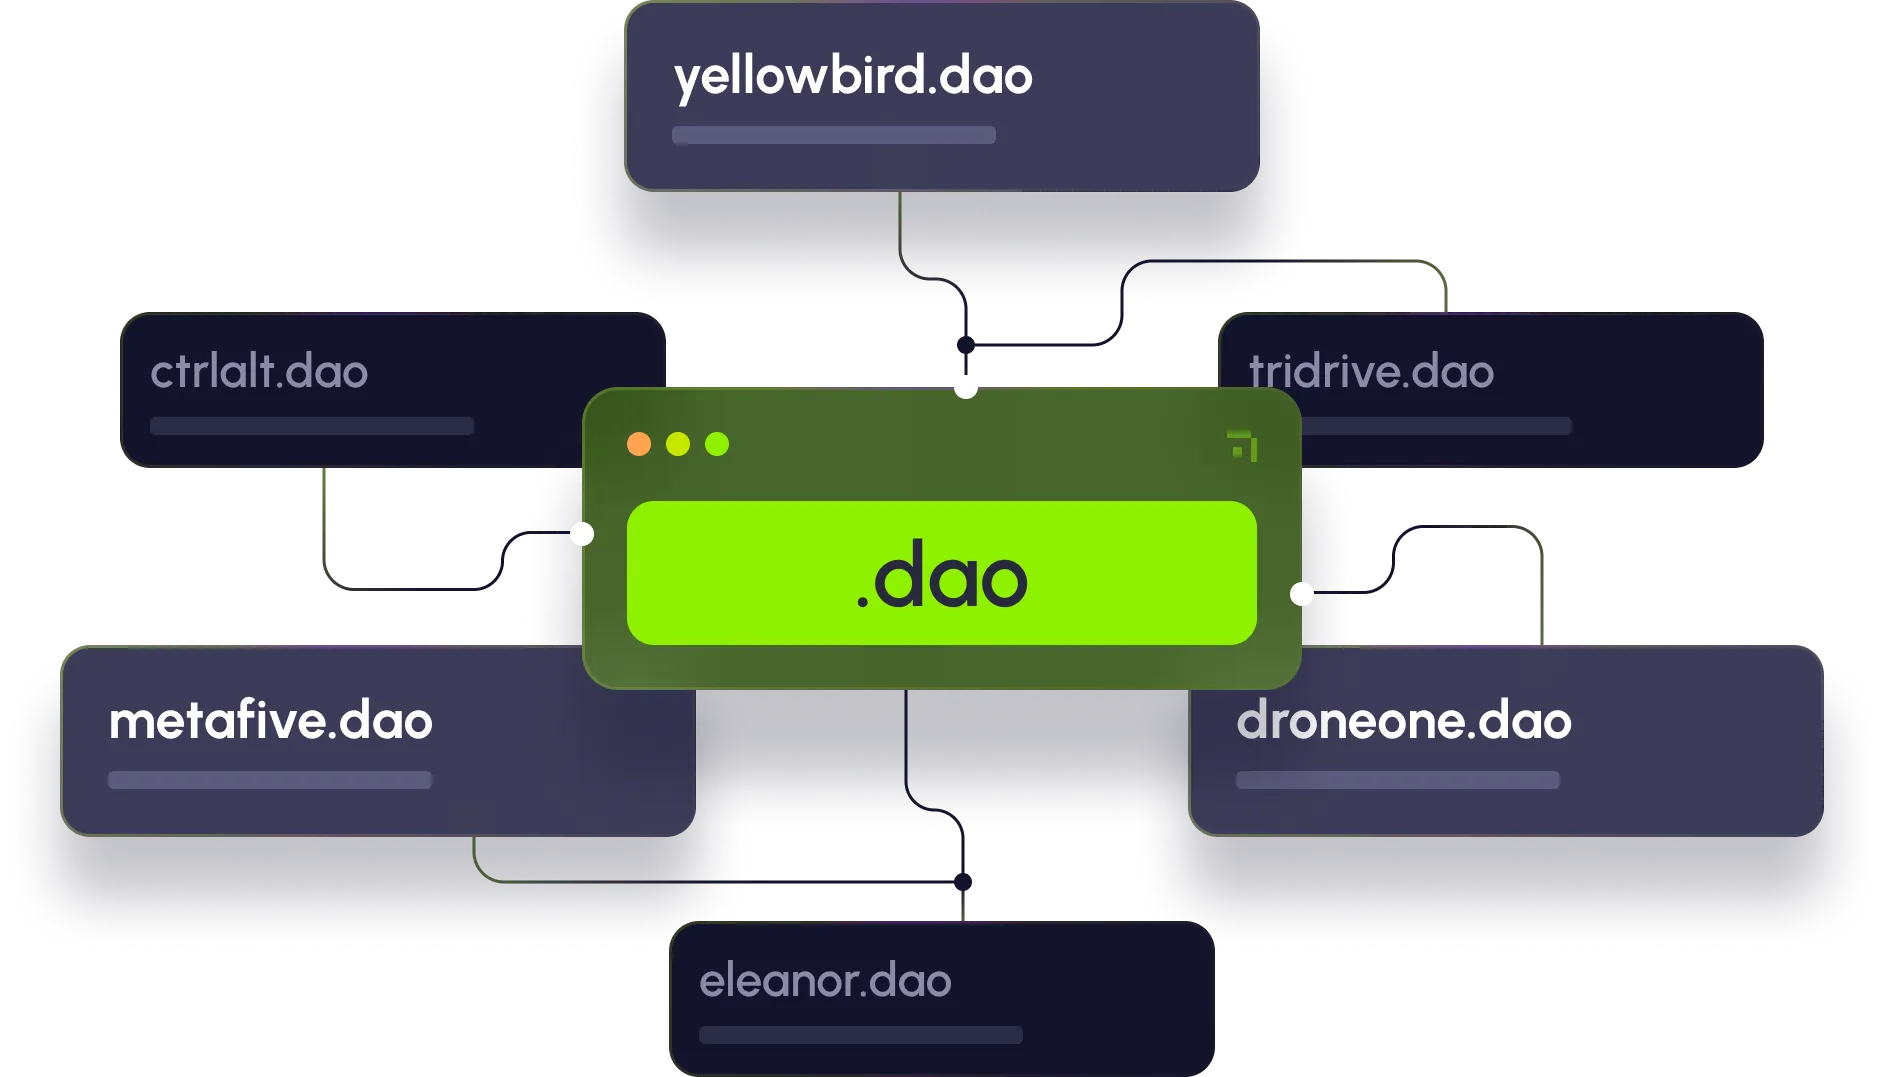 Illustration showing how the domain.dao is perfect for DAOs